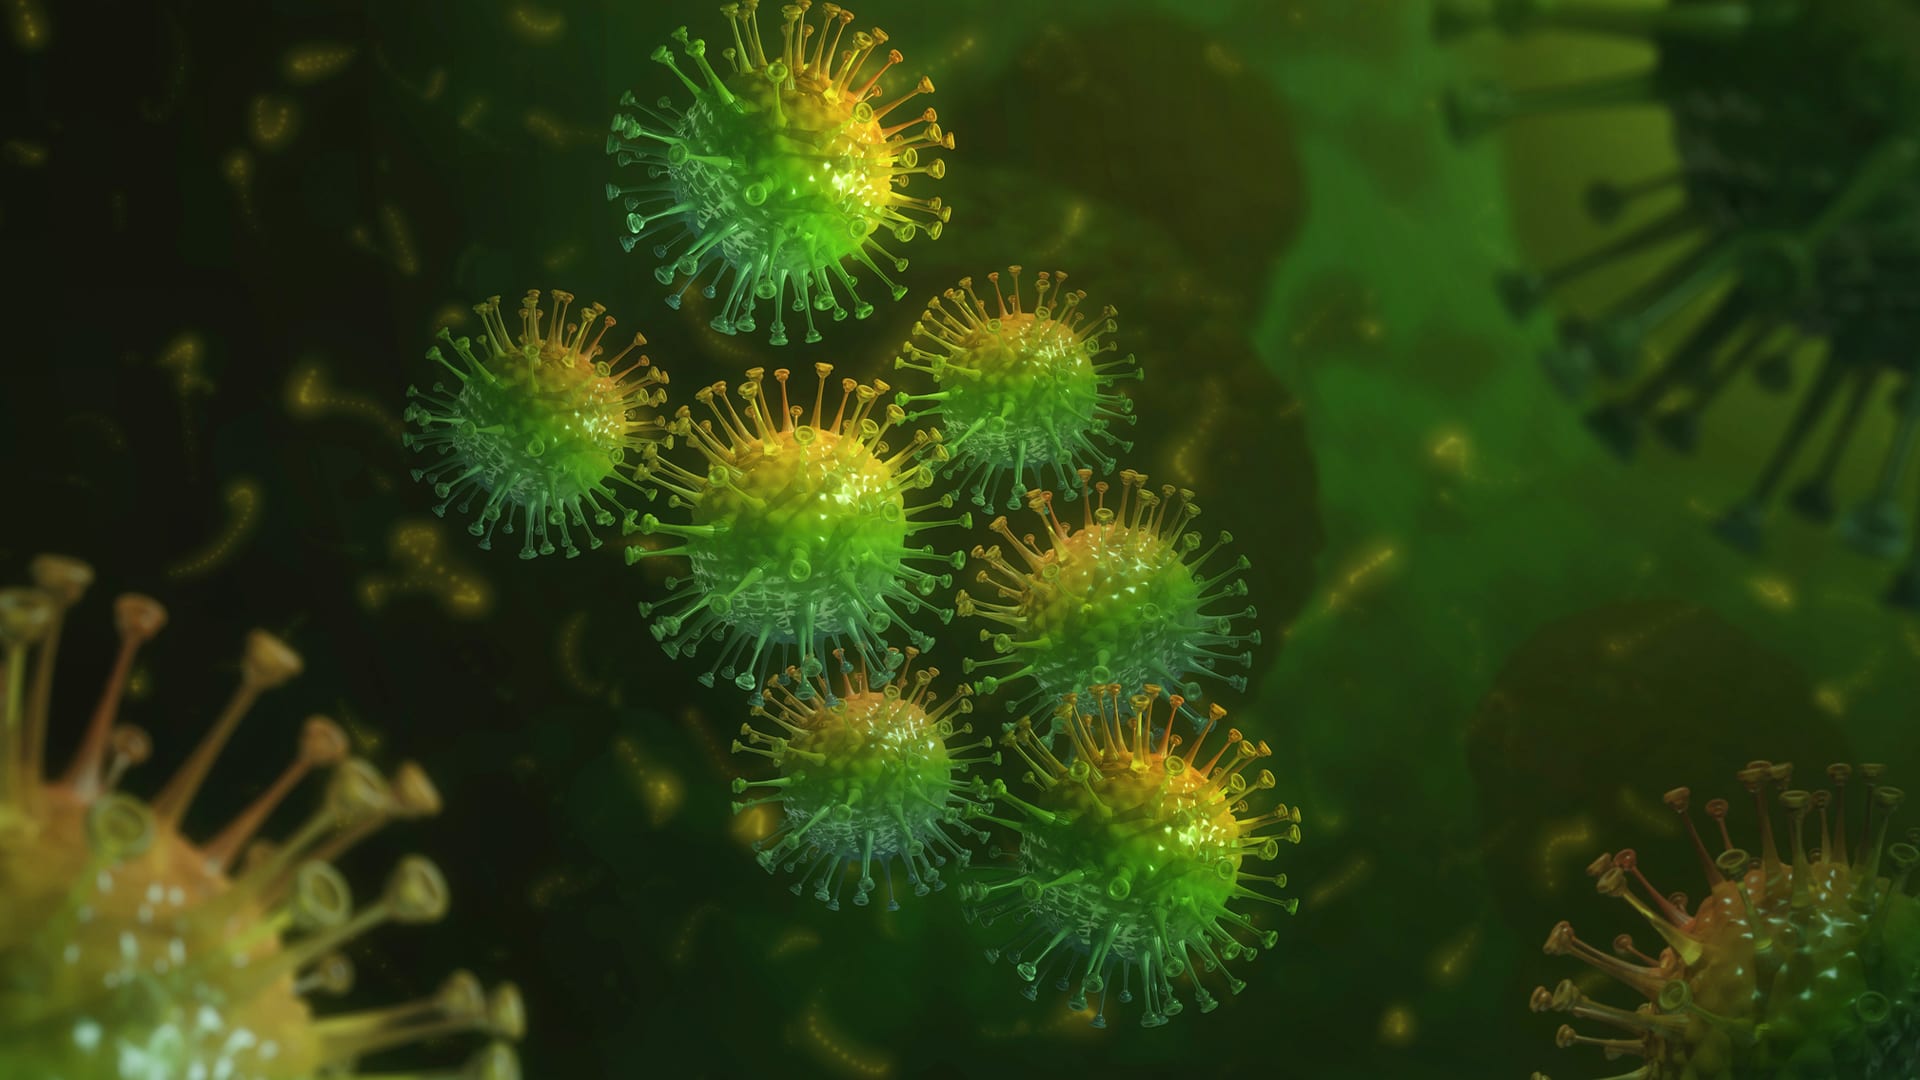 Where will the next form of flavivirus infection come from?